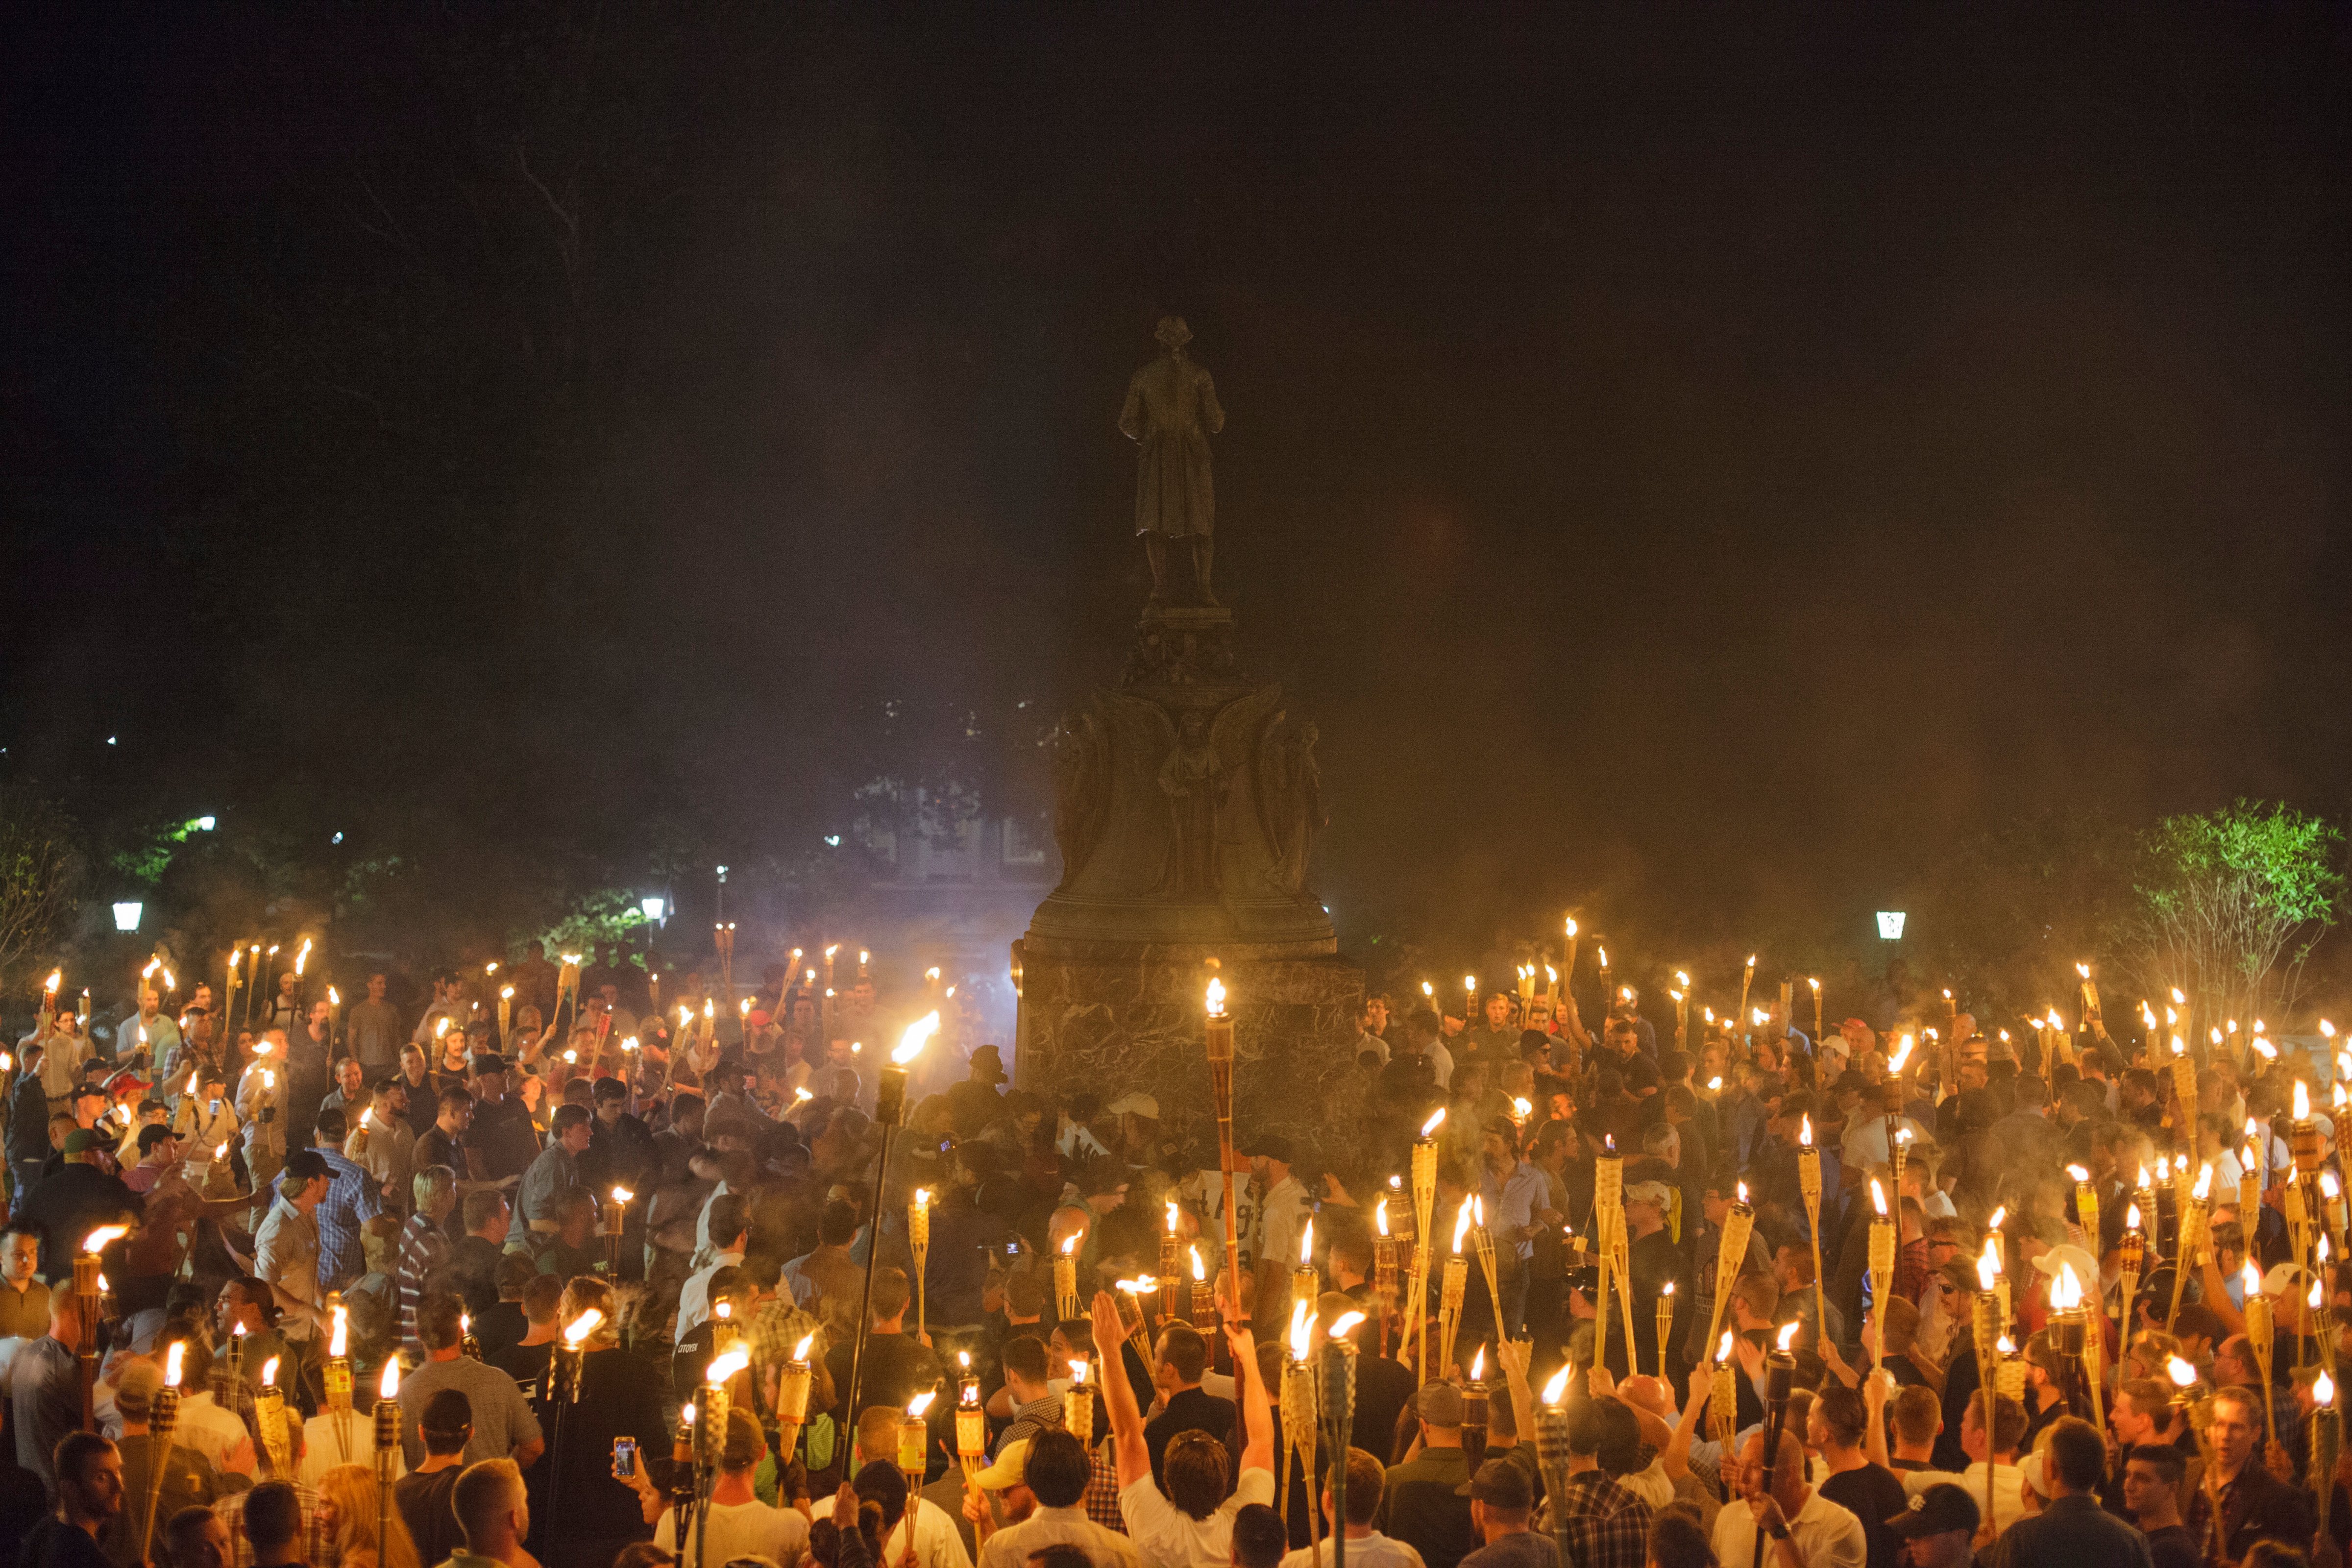 Neo Nazis, Alt-Right, and White Supremacists encircle counter protestors at the base of a statue of Thomas Jefferson after marching through the University of Virginia campus with torches in Charlottesville, Va. on August 11, 2017. (Shay Horse&mdash;Sipa USA/AP)